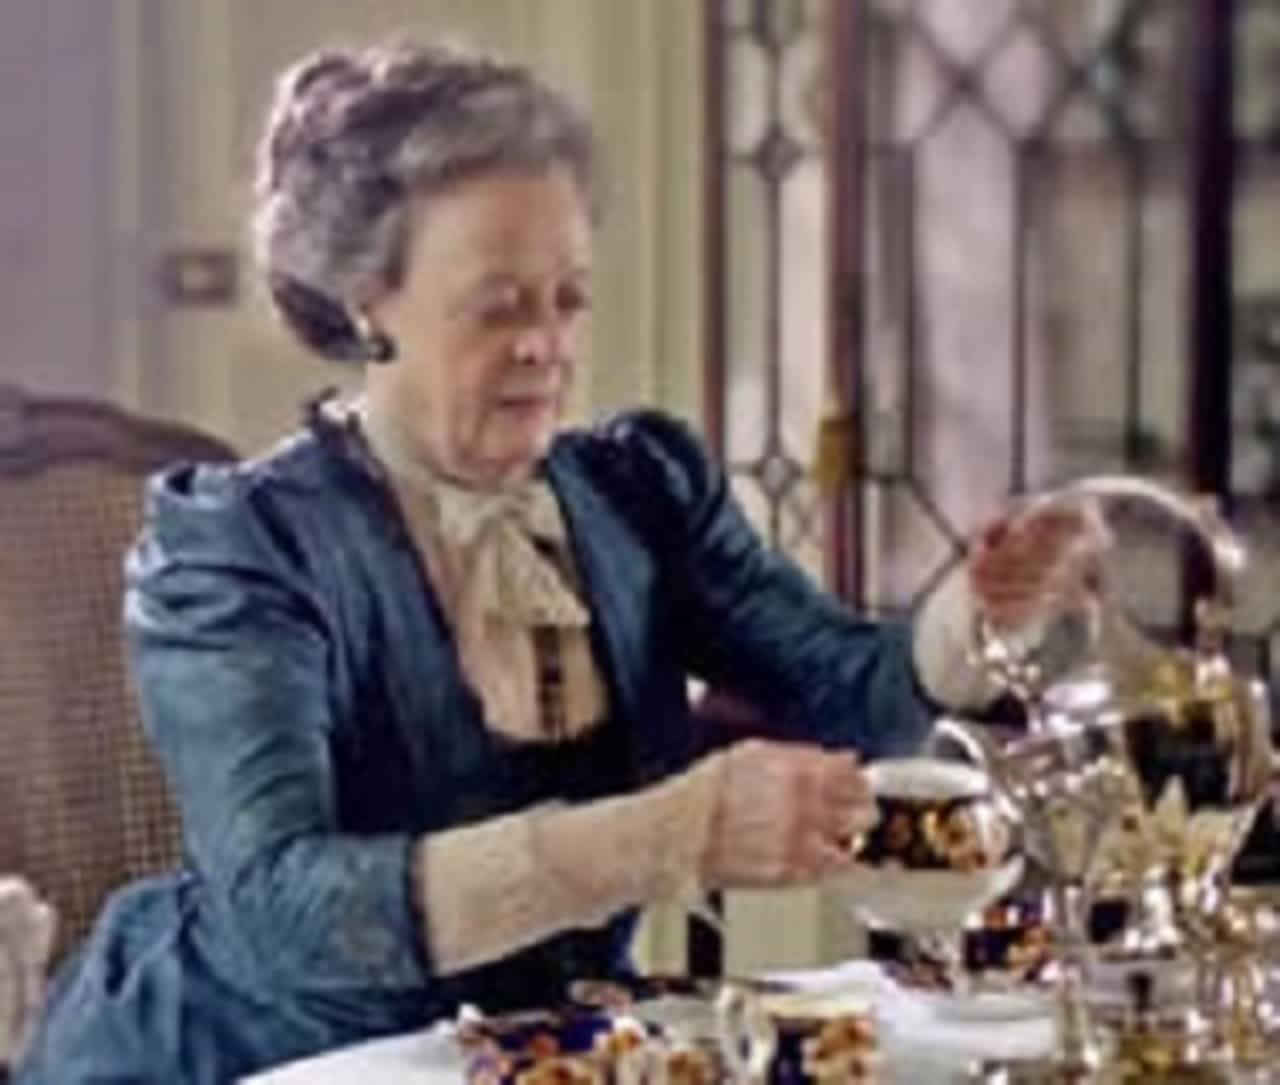 Cyrenius H. Booth Library in Newtown, Conn., has sets its annual Downton Abbey Tea, named in honor of the hit British drama series, for Sunday, Jan. 10.